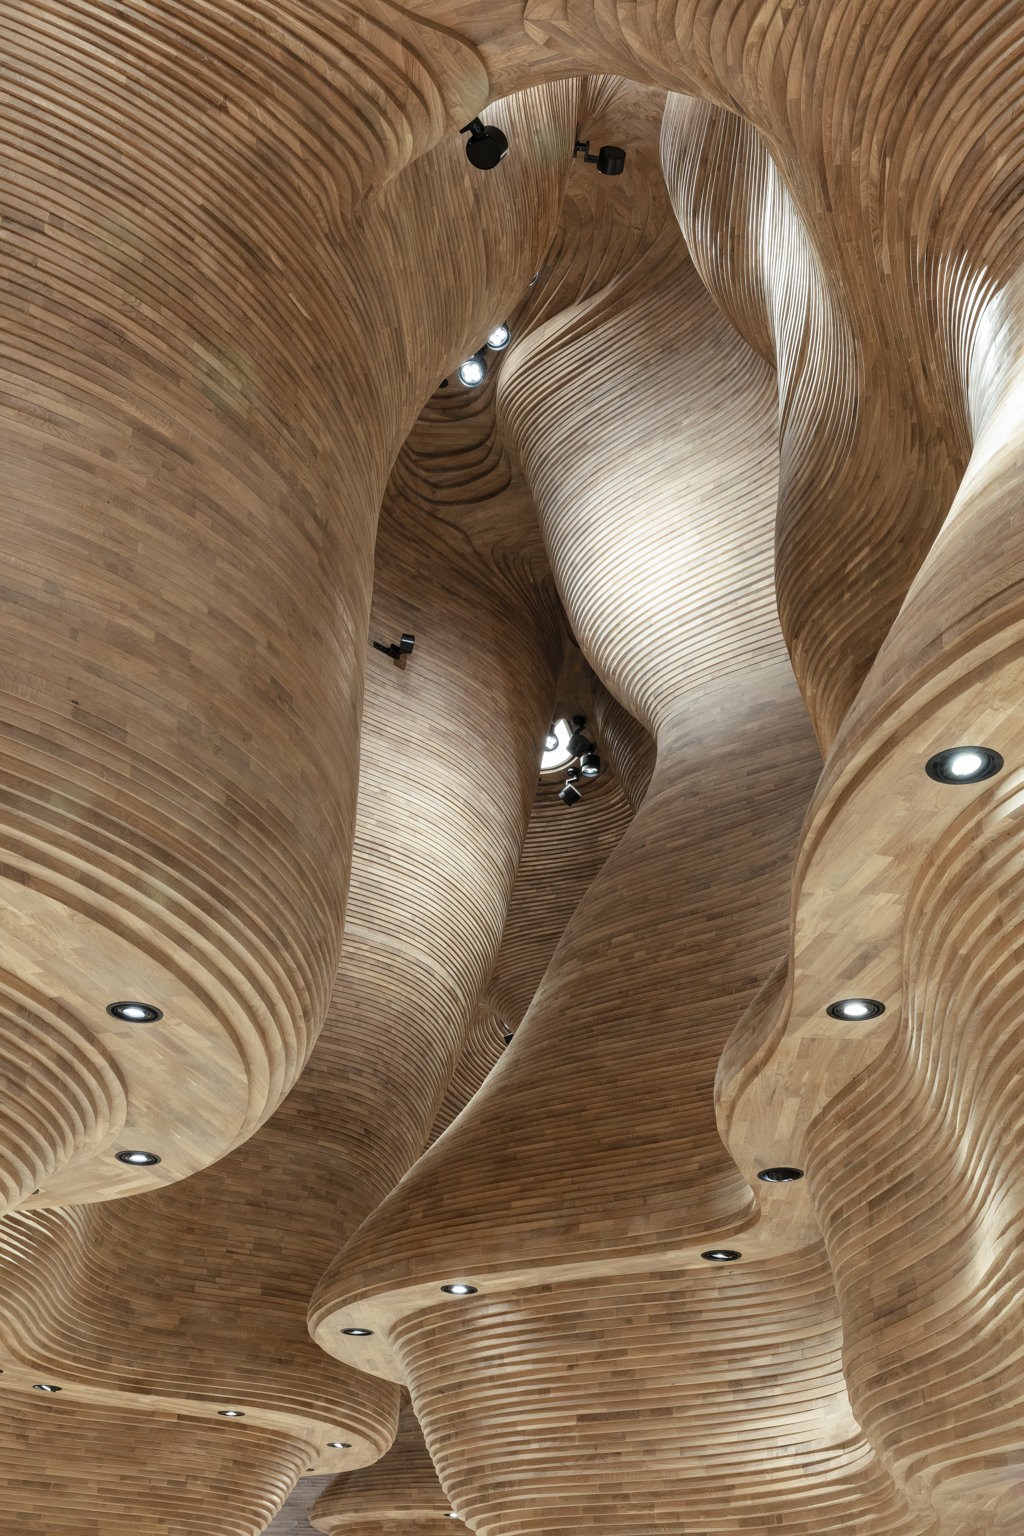 wooden canyon at National Museum of Qatar